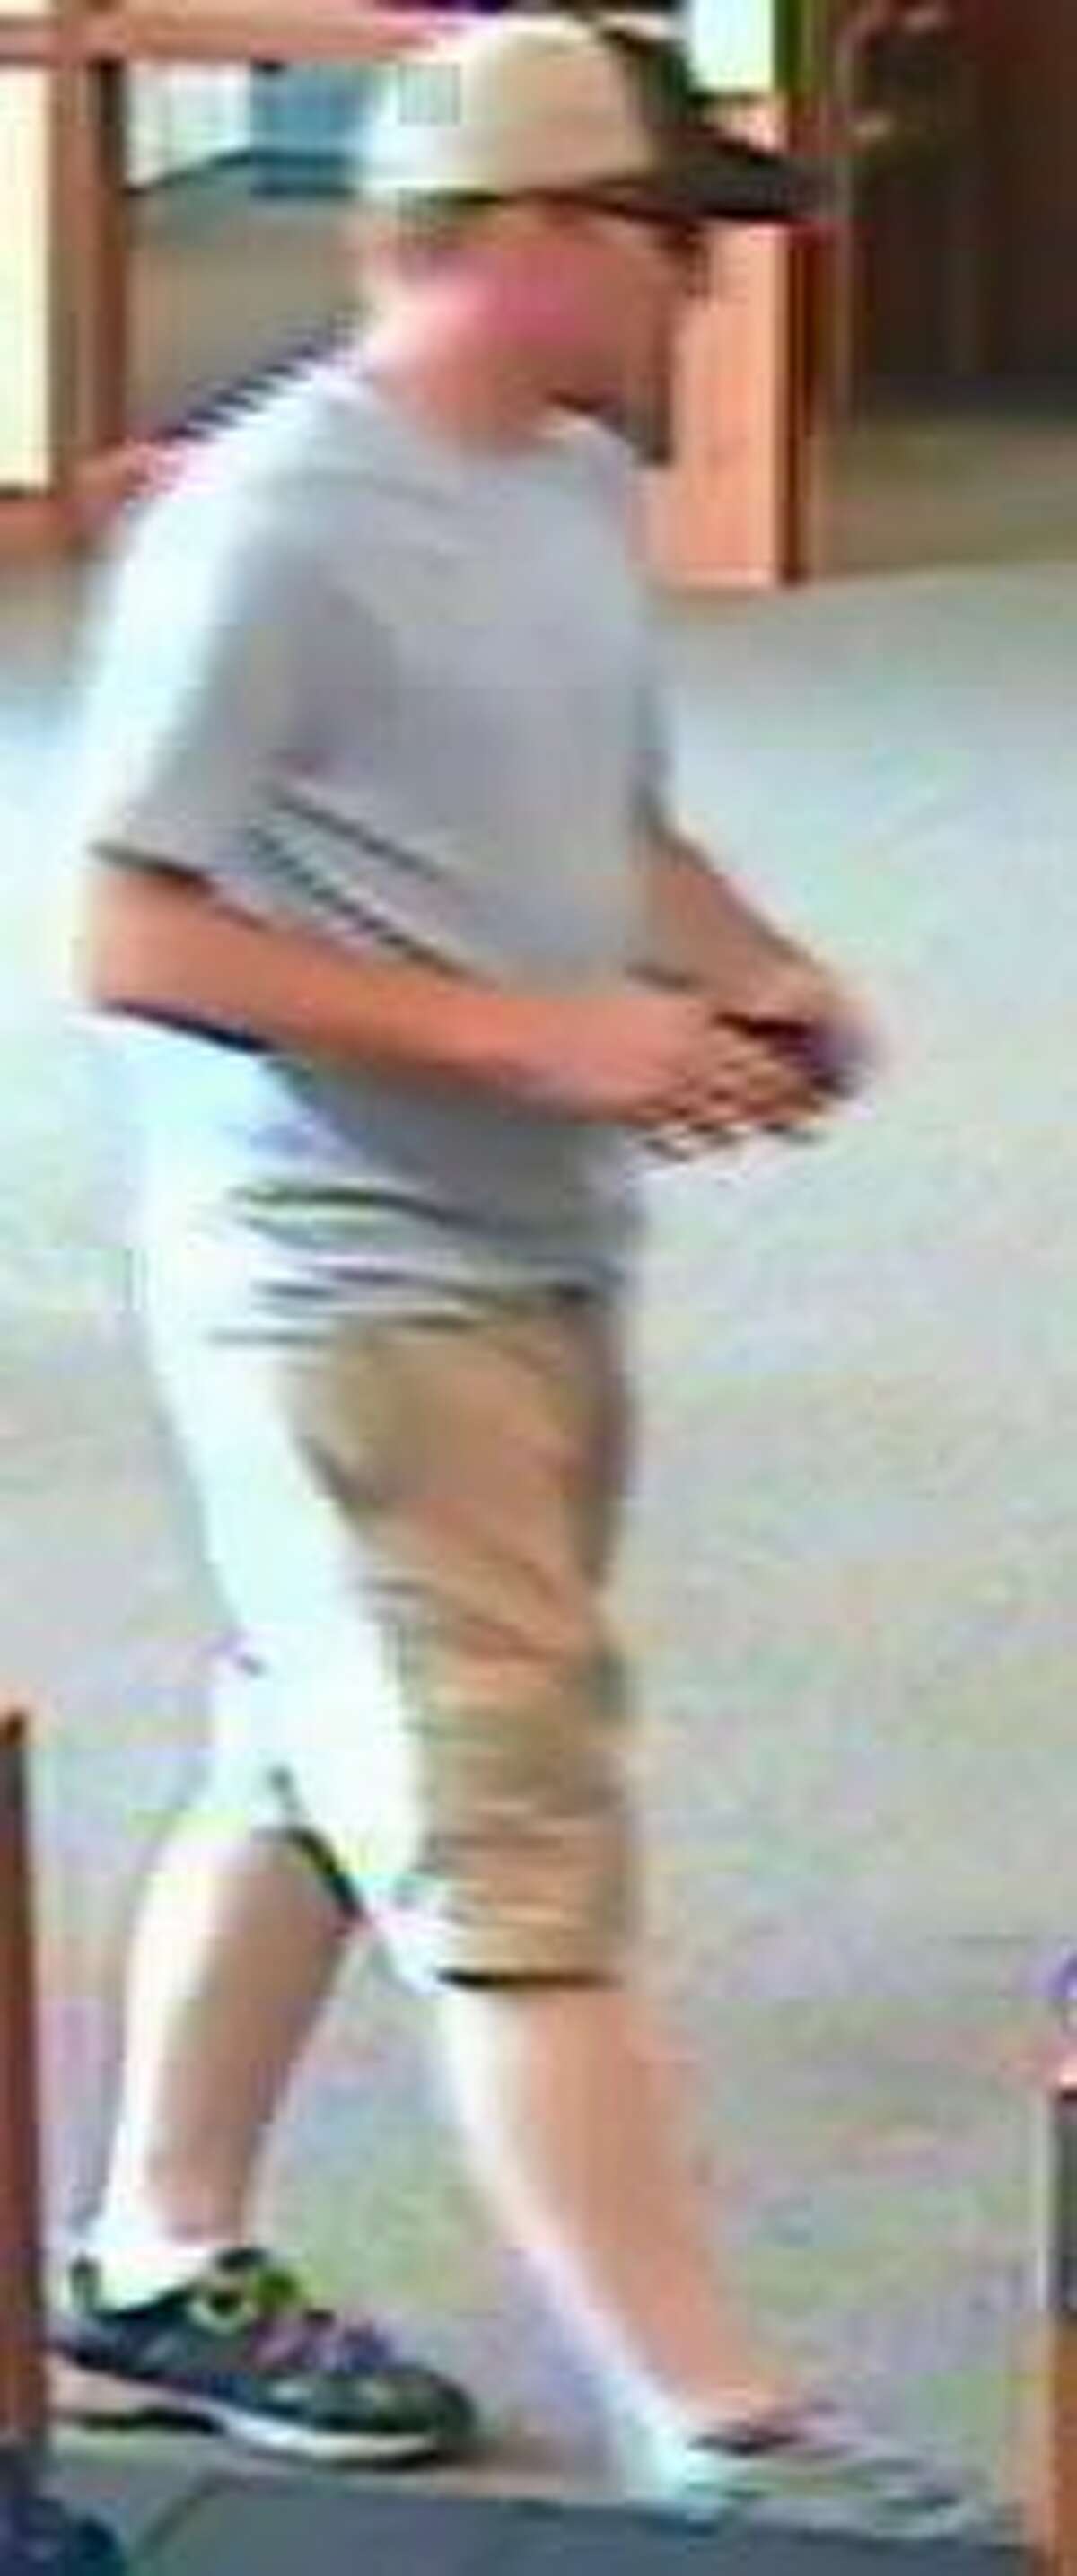 Pictured is a full-body shot of the suspect from yesterday's robbery at First Mid-Illinois Bank and Trust.